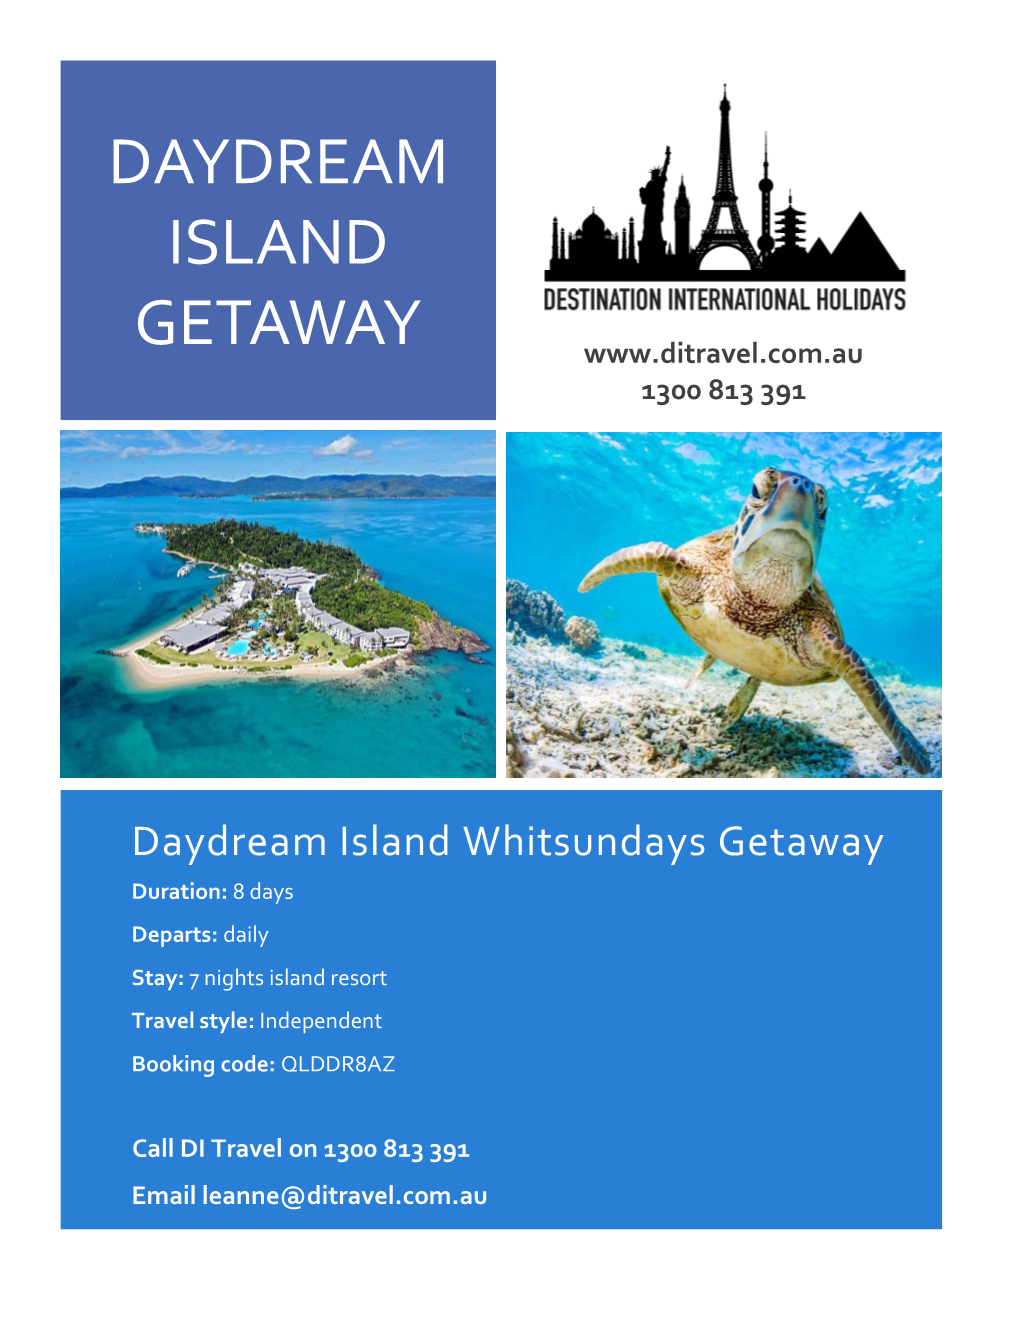 Daydream Island Whitsundays Getaway Duration: 8 Days Departs: Daily Stay: 7 Nights Island Resort Travel Style: Independent Booking Code: QLDDR8AZ